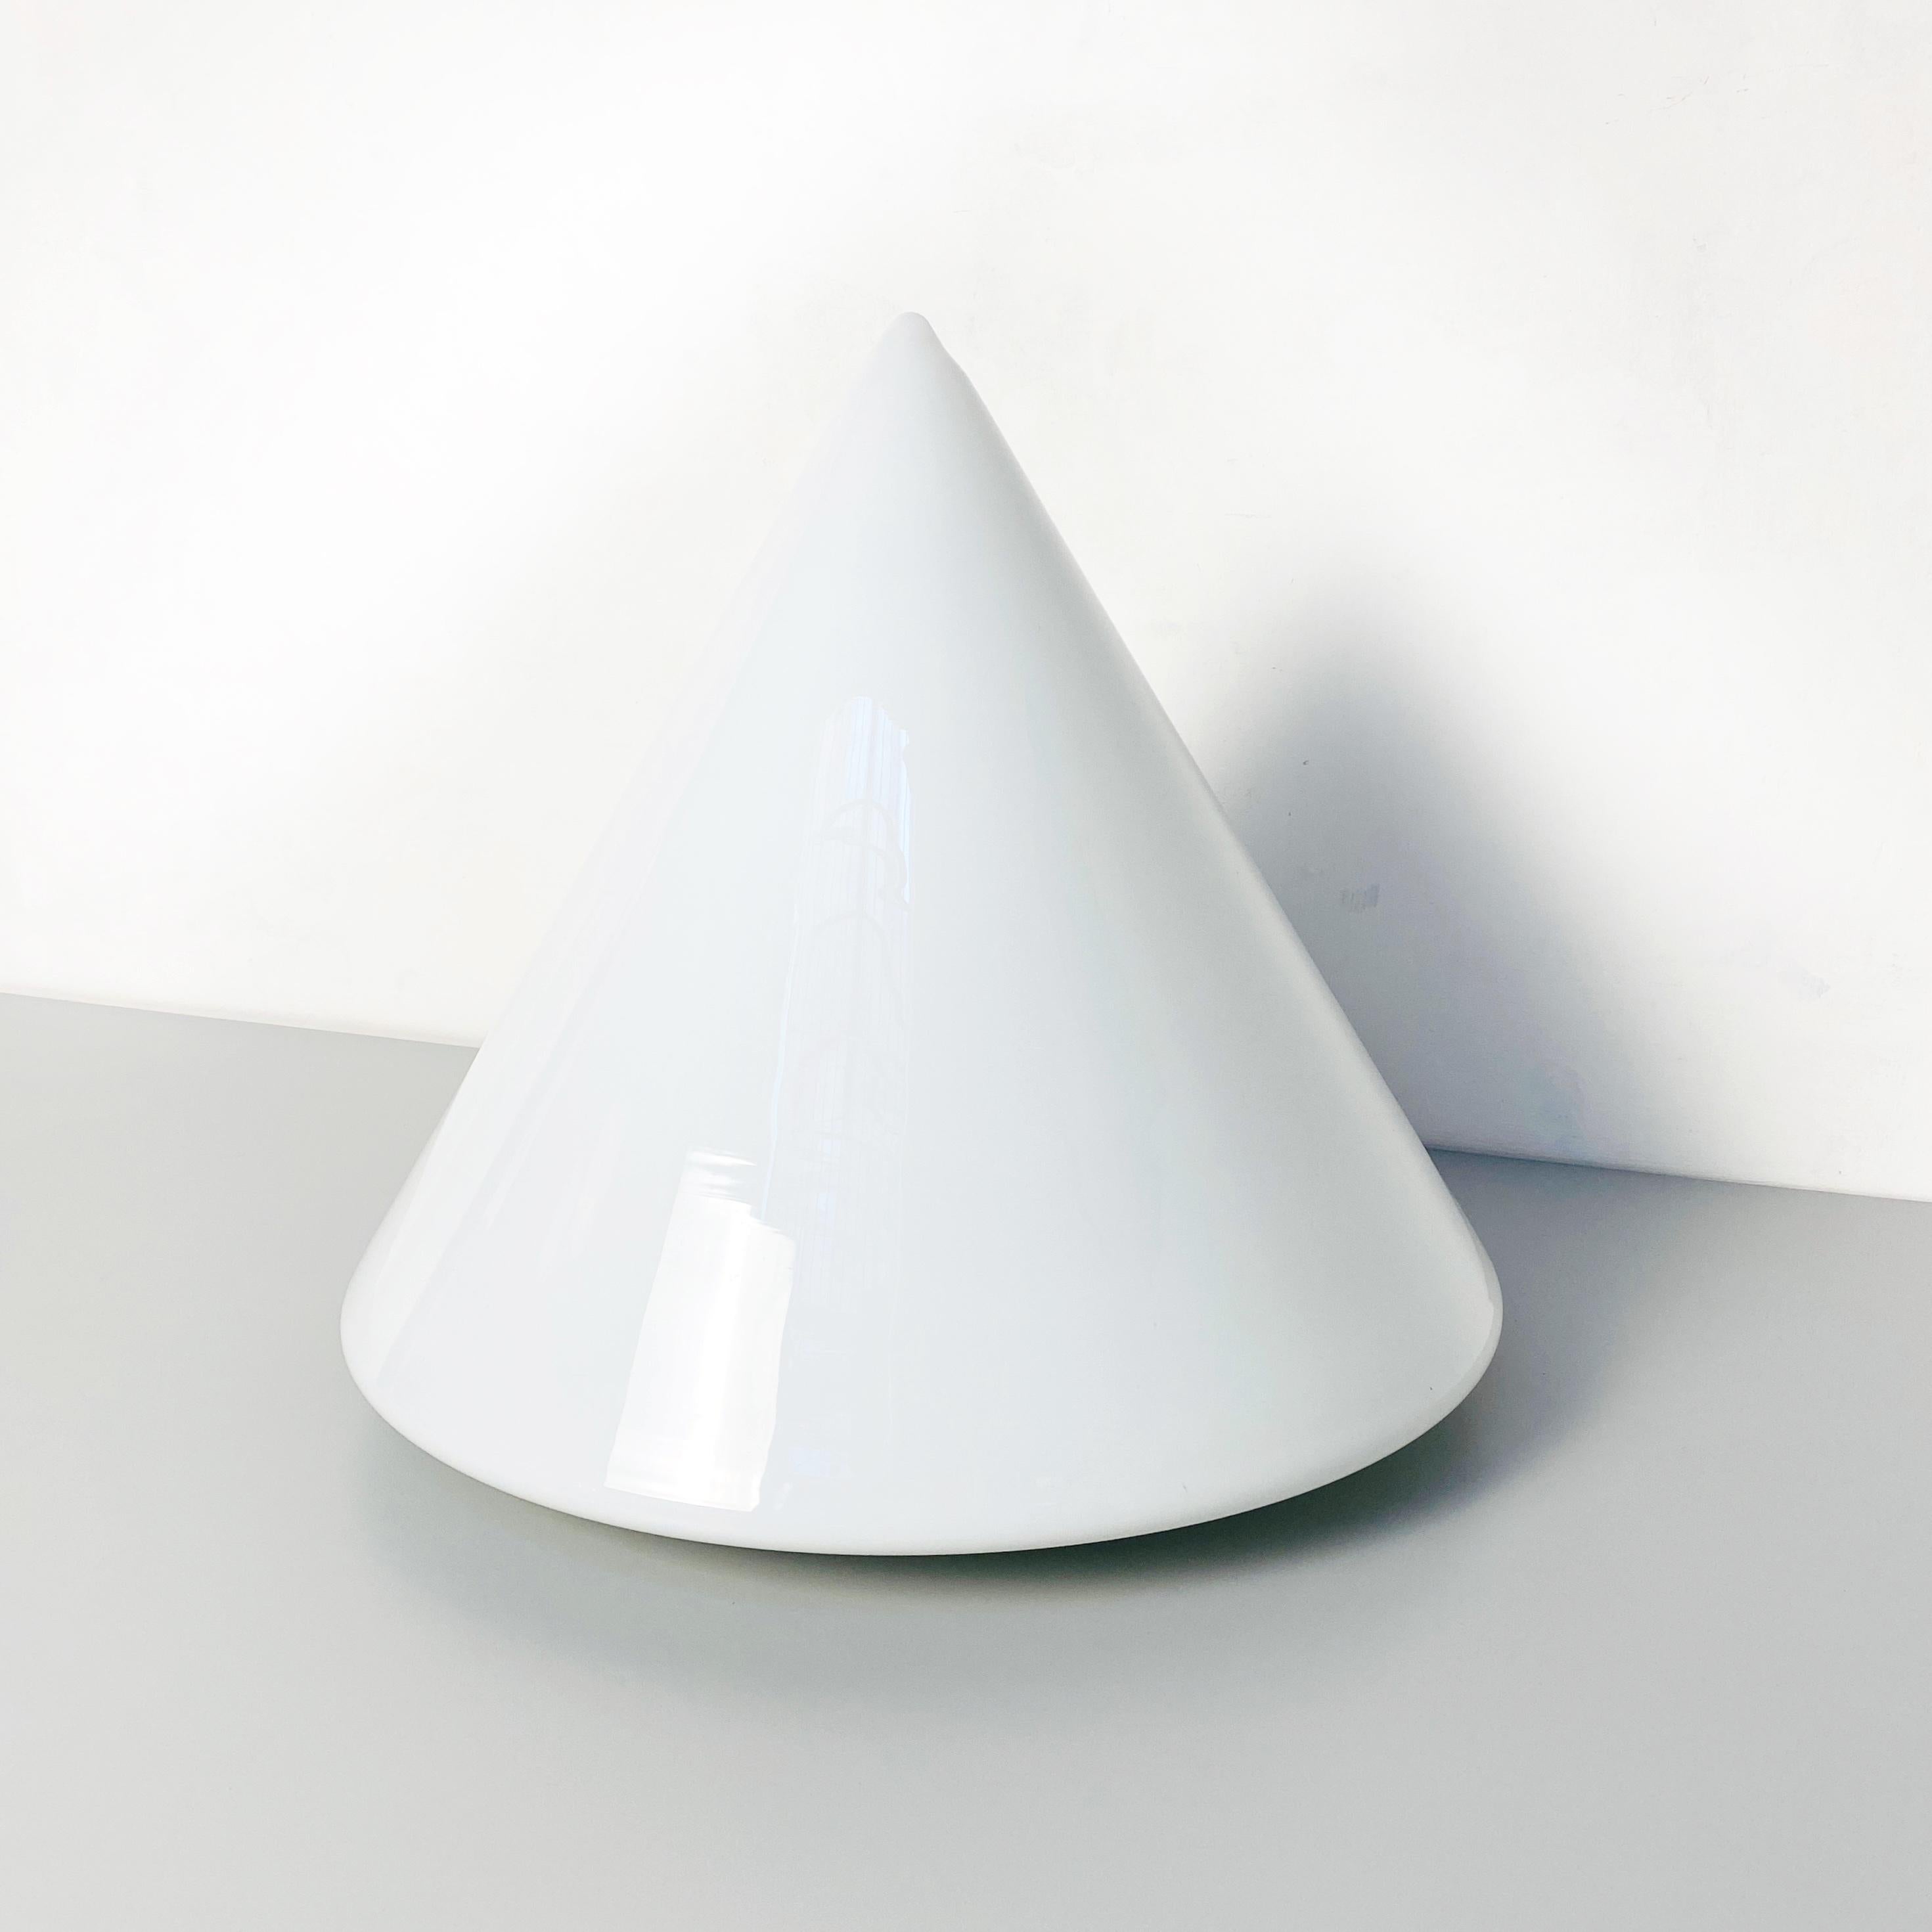 Italian Mid-Century Modern Conical Table Lamp with Double Opal Glass, 1970s For Sale 5